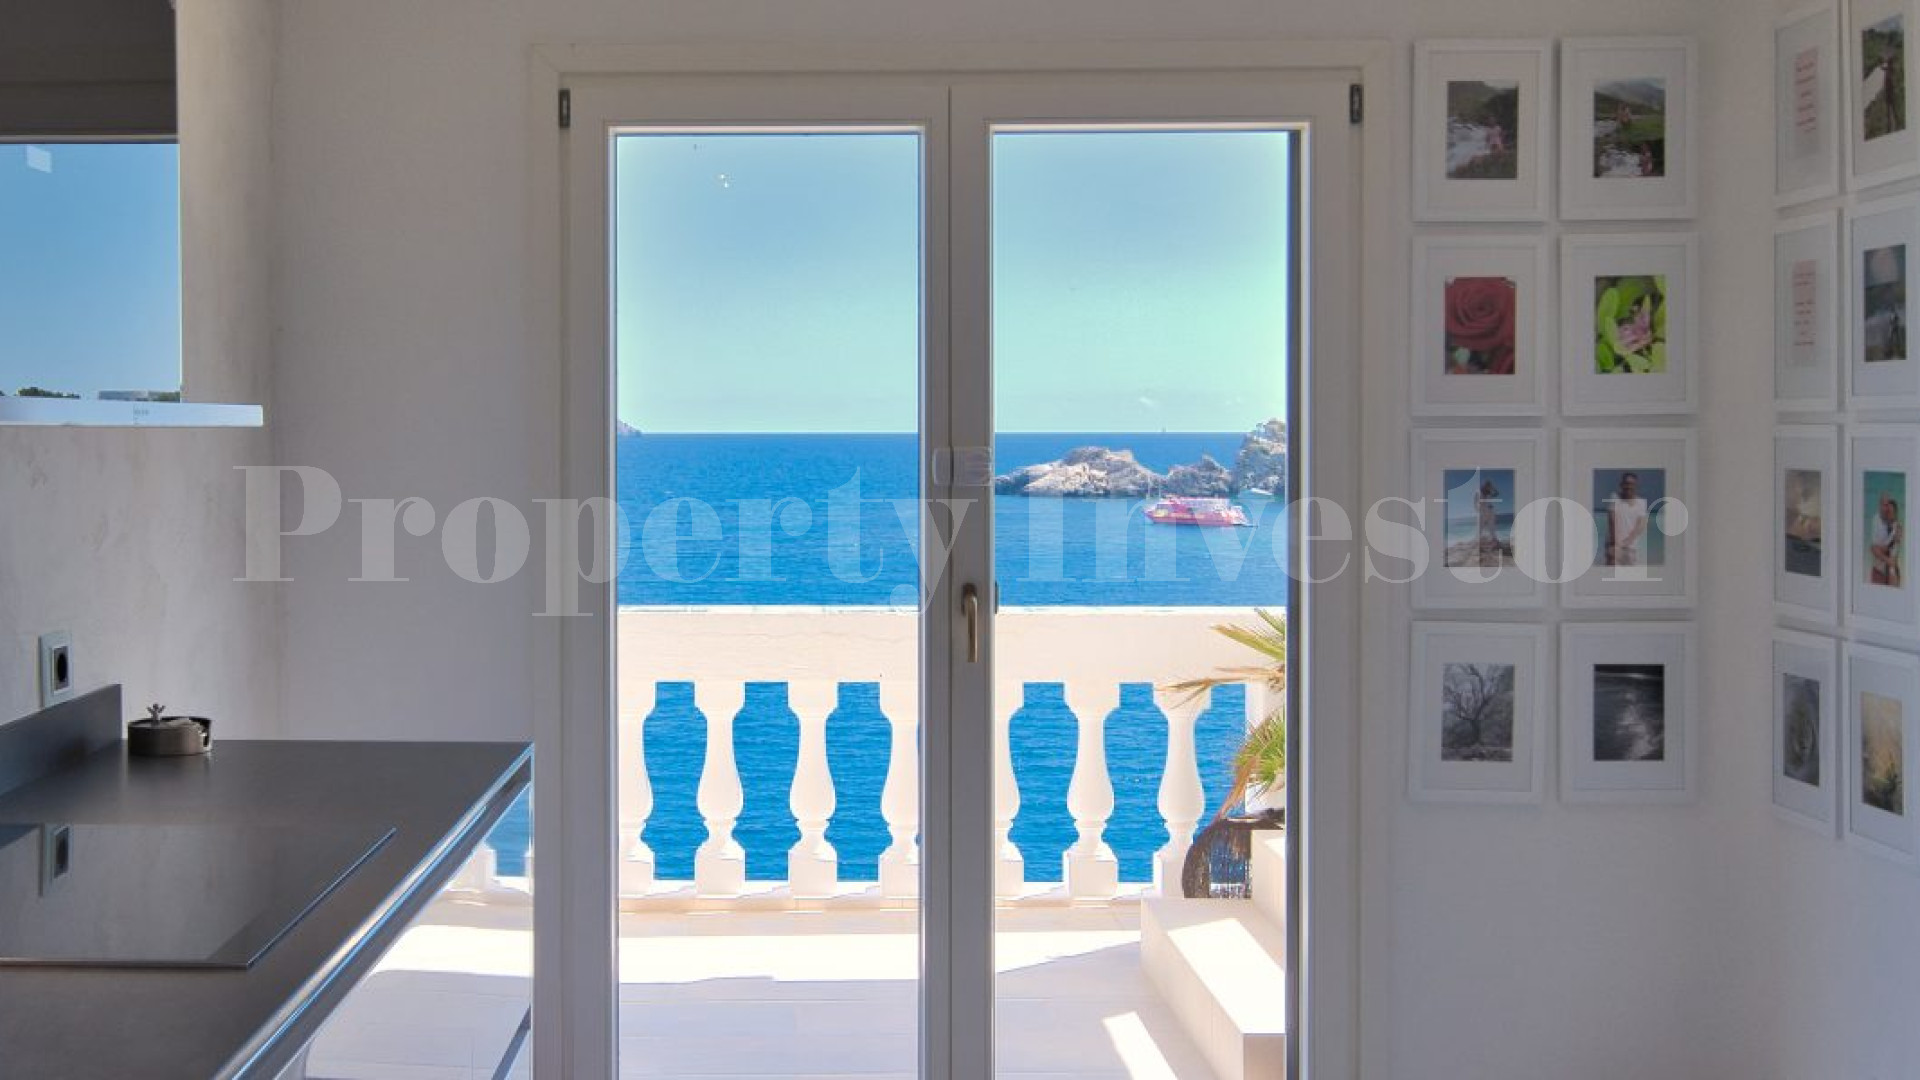 3 Bedroom First Line Apartment in Cala Fornells, Mallorca